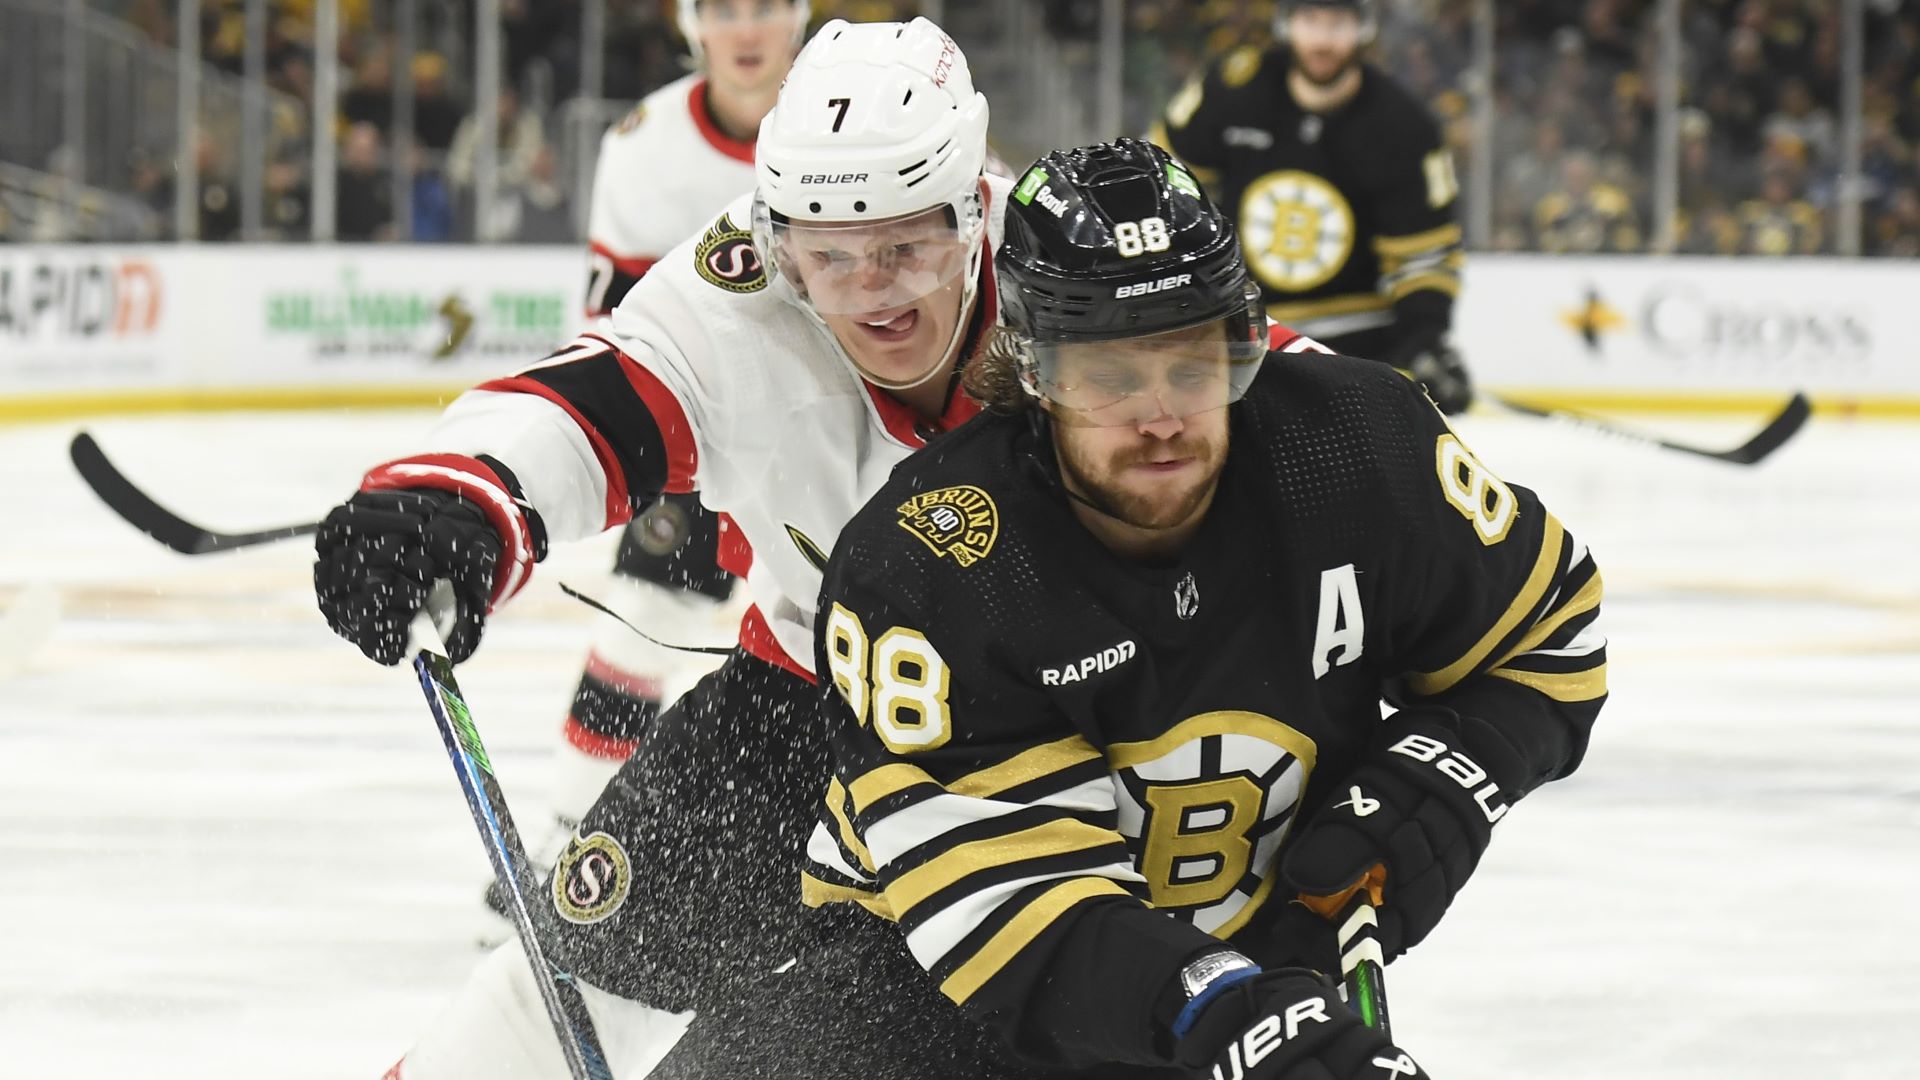 How To Watch Full Bruins, Red Sox Coverage Tuesday On NESN Networks